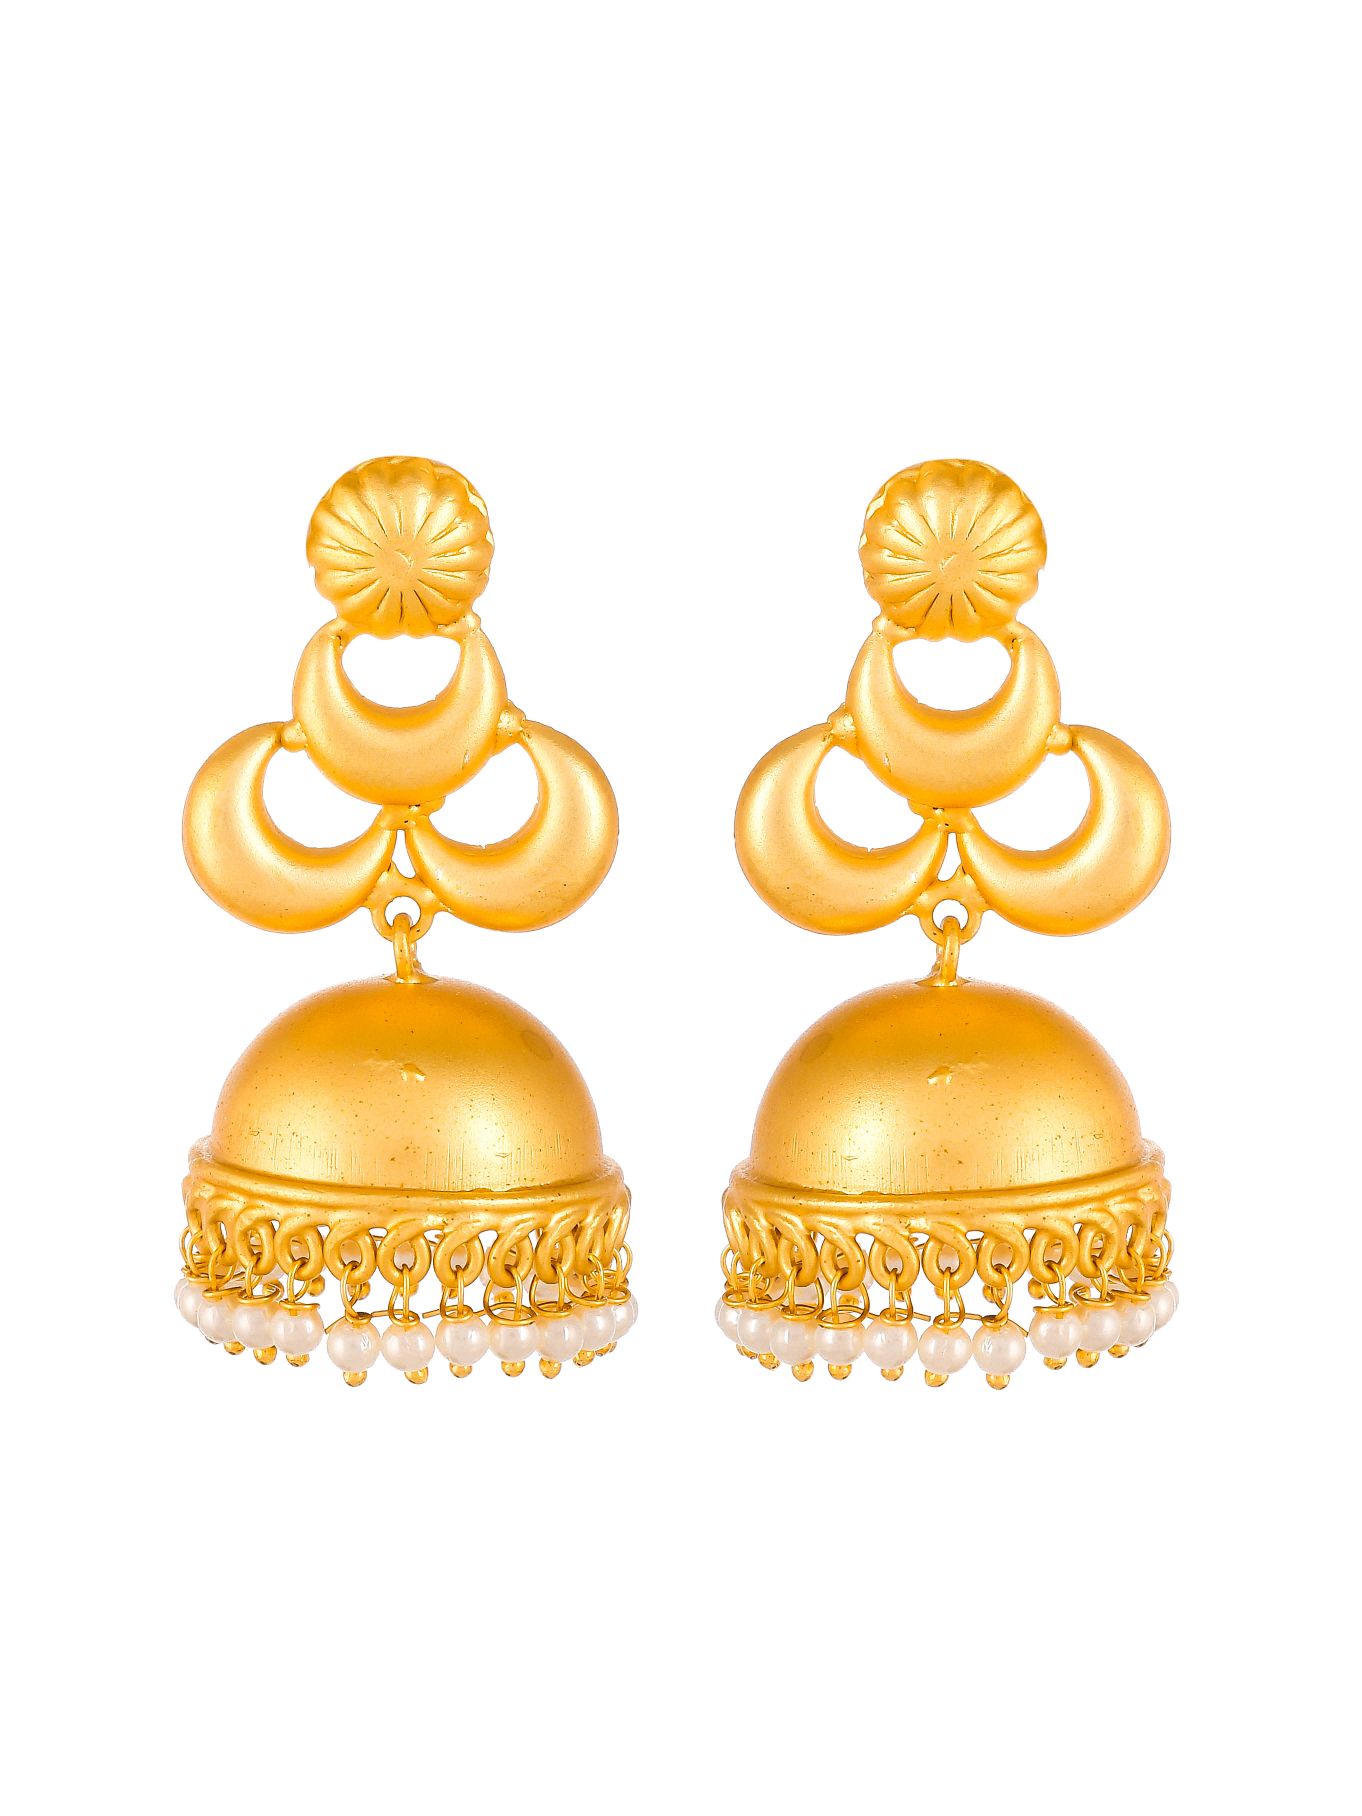 Pin on Exquisite Bengal Jewels  Earrings